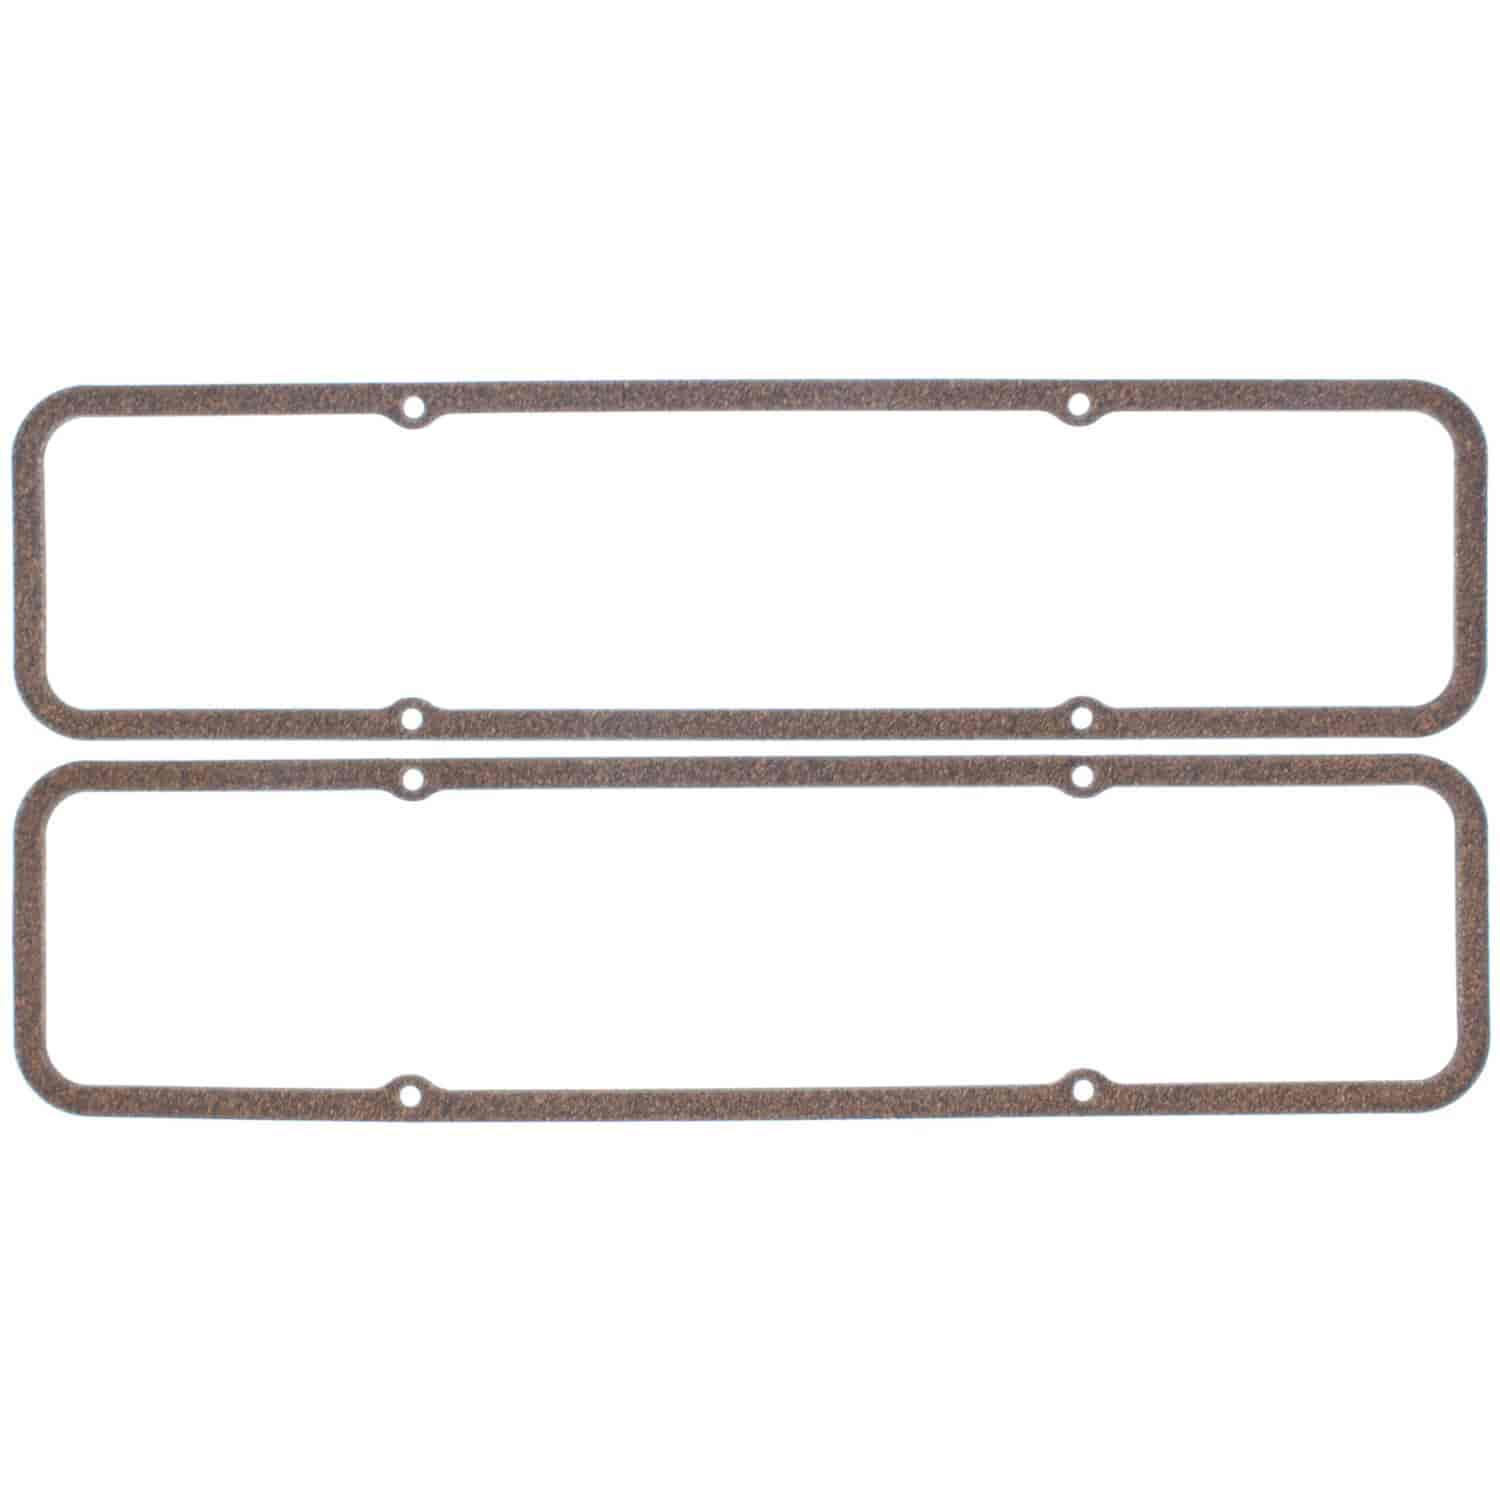 Valve Cover Gasket Set 1957-1987 Small Block Chevy 265/283/302/305/307/327/350/400 in Cork with Metal Carrier